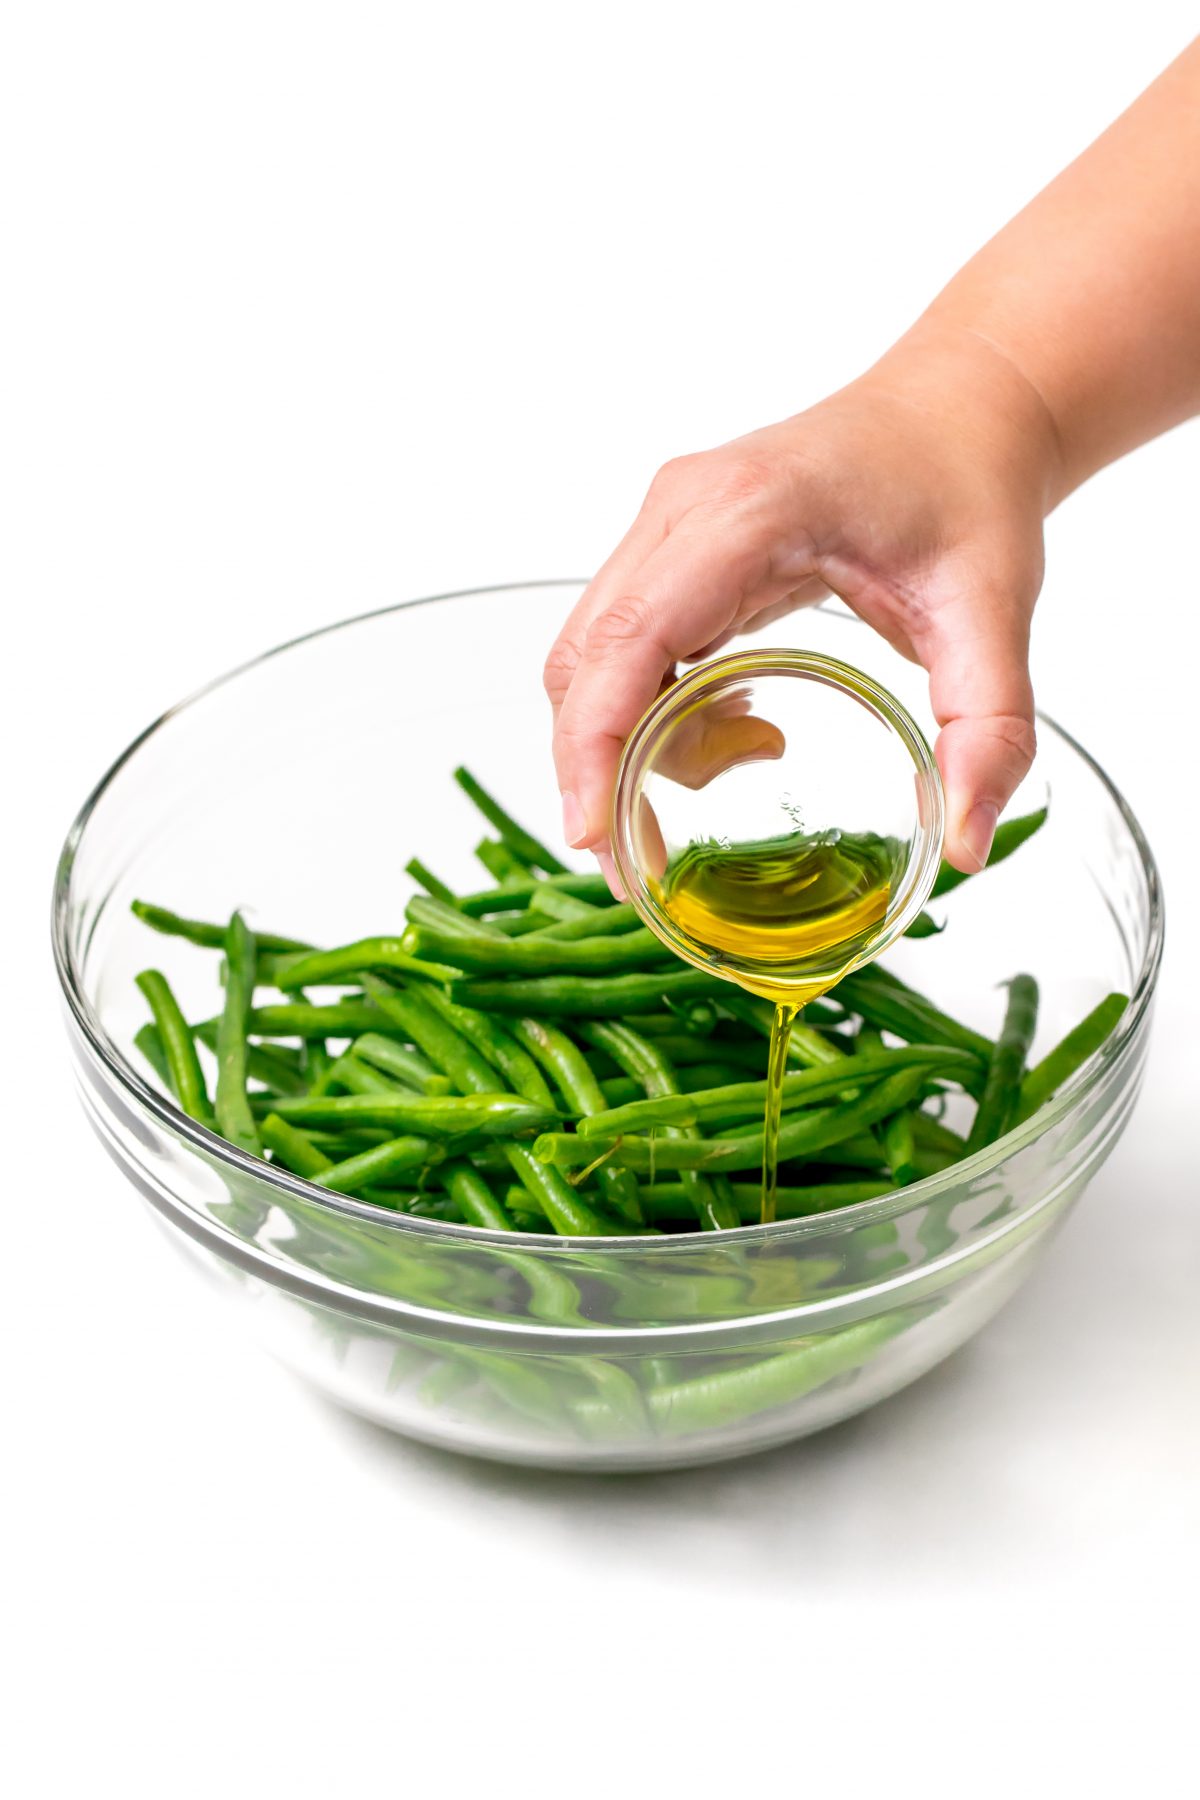 Drizzle olive oil and lemon juice over green beans